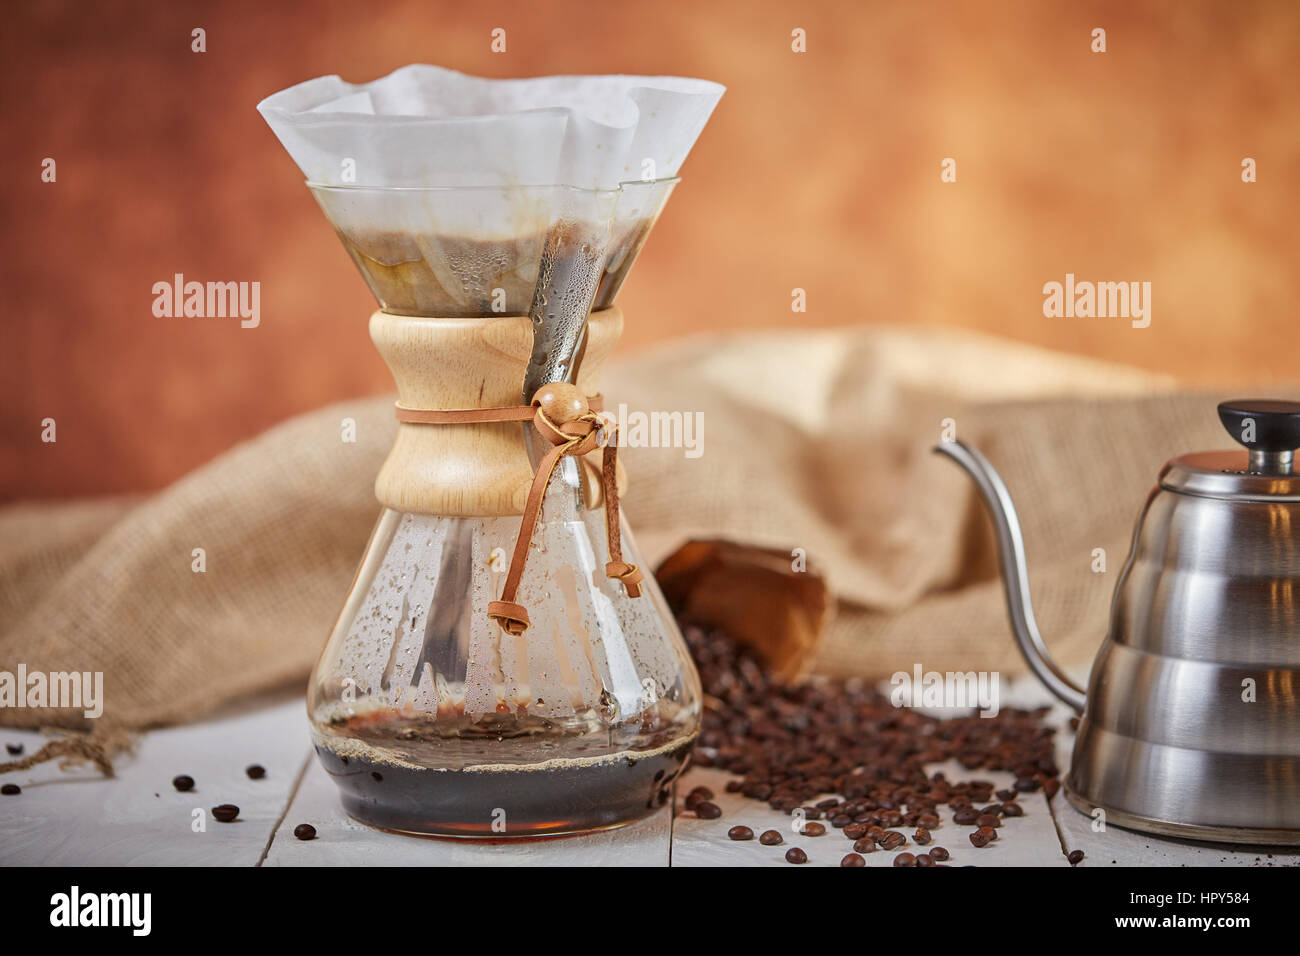 https://c8.alamy.com/comp/HPY584/brewign-third-wave-coffee-with-chemex-glass-and-drip-kettle-for-pure-HPY584.jpg